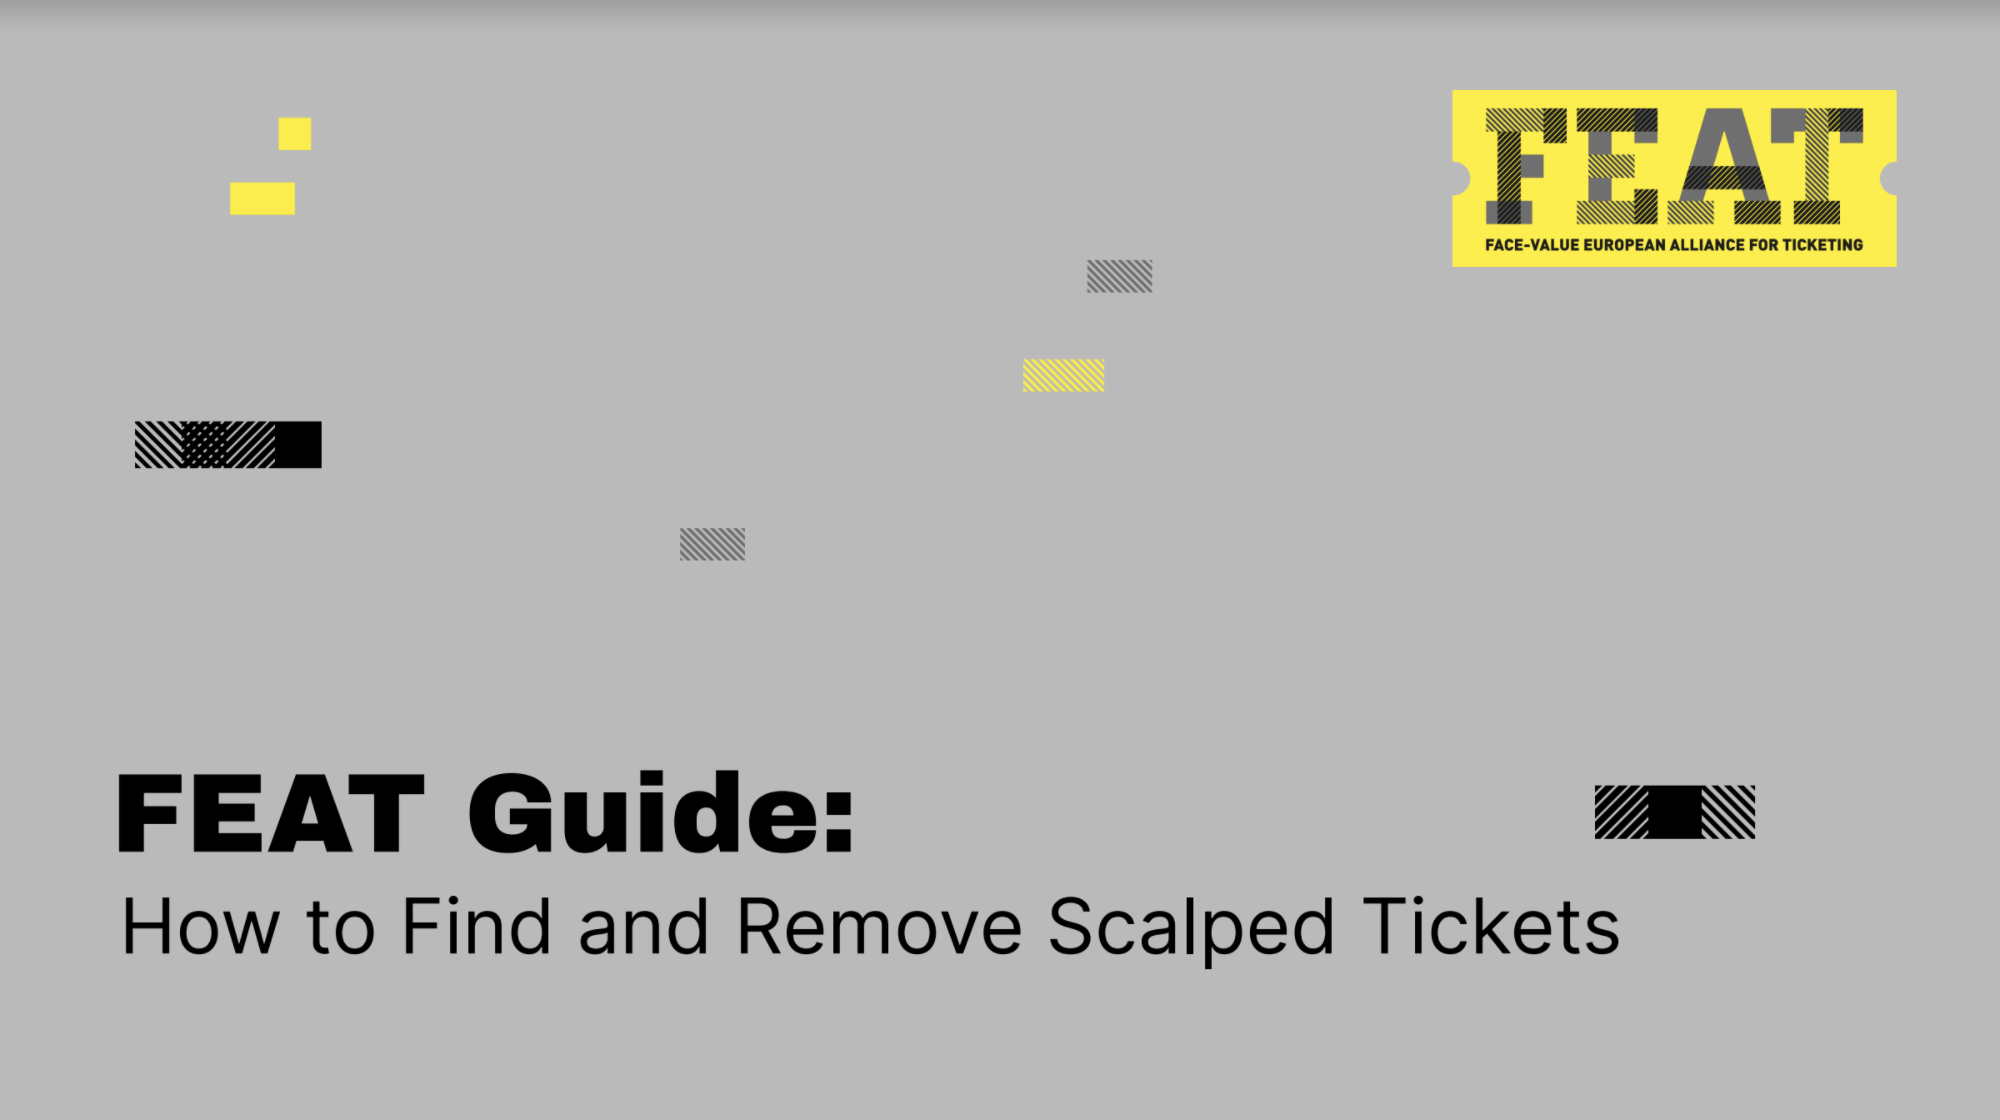 FEAT Launches Guide on How to Find and Remove Touted Tickets